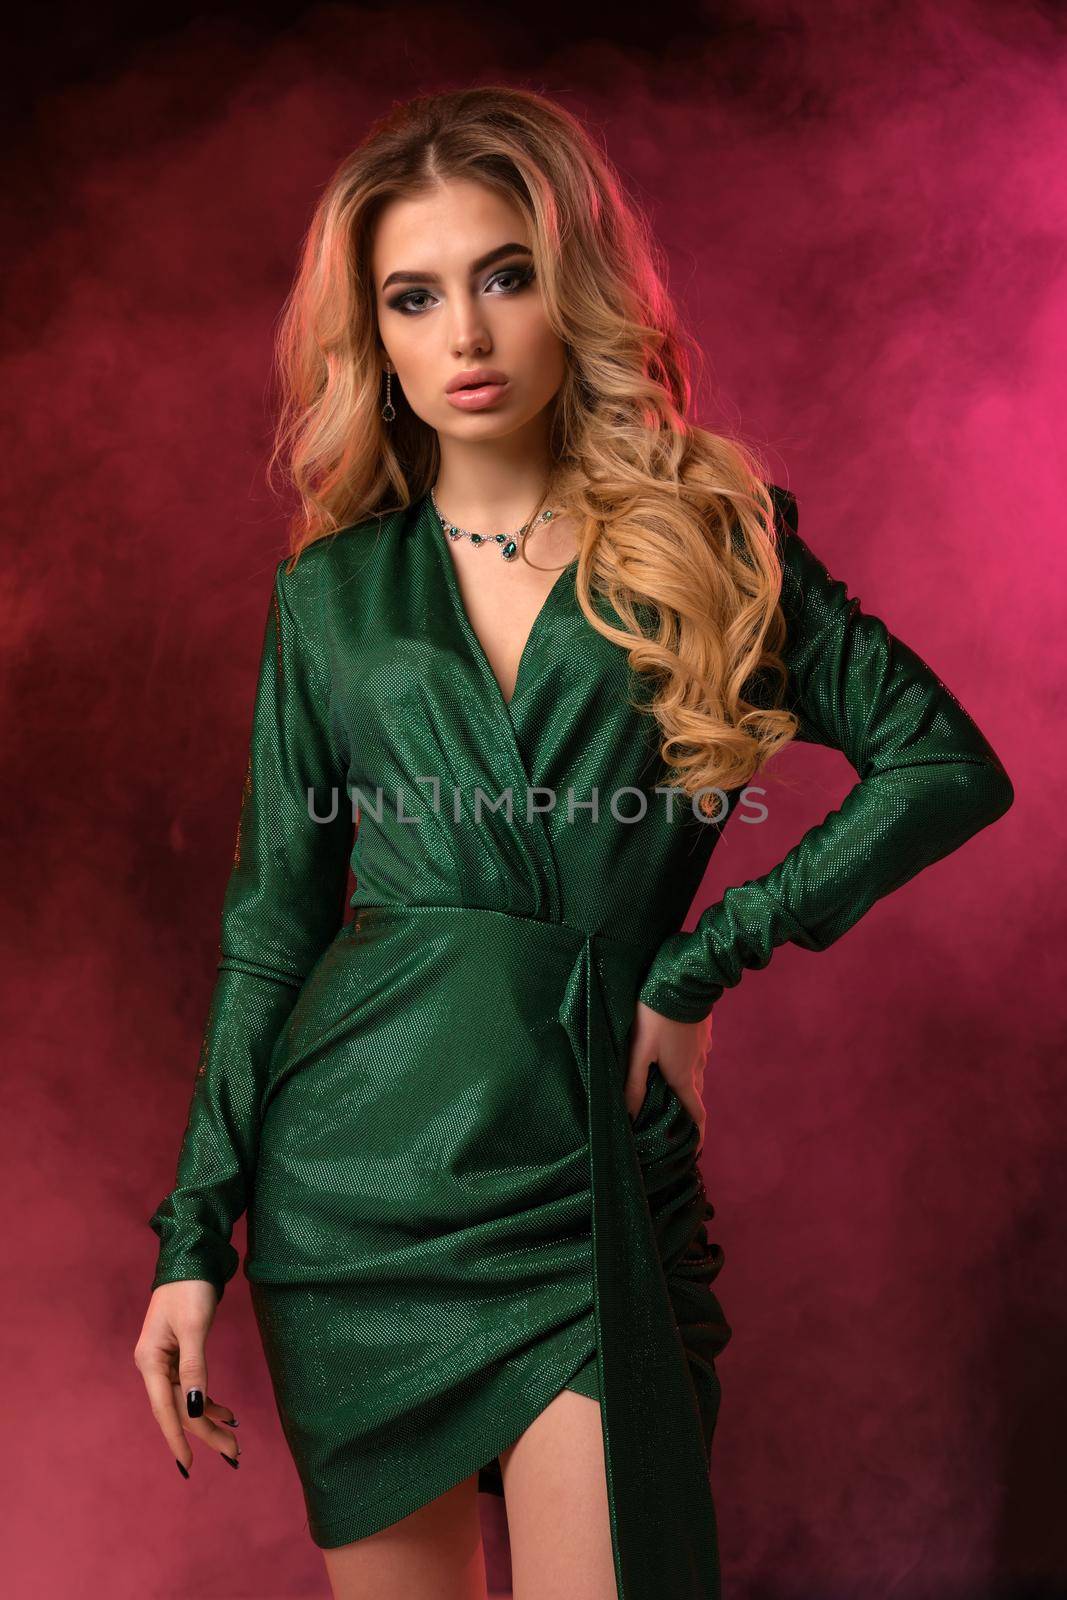 Gorgeous blonde curly woman with bright make-up, in green stylish dress and jewelry. She has put her hand on waist, posing against colorful smoky studio background. Fashion and beauty. Close up